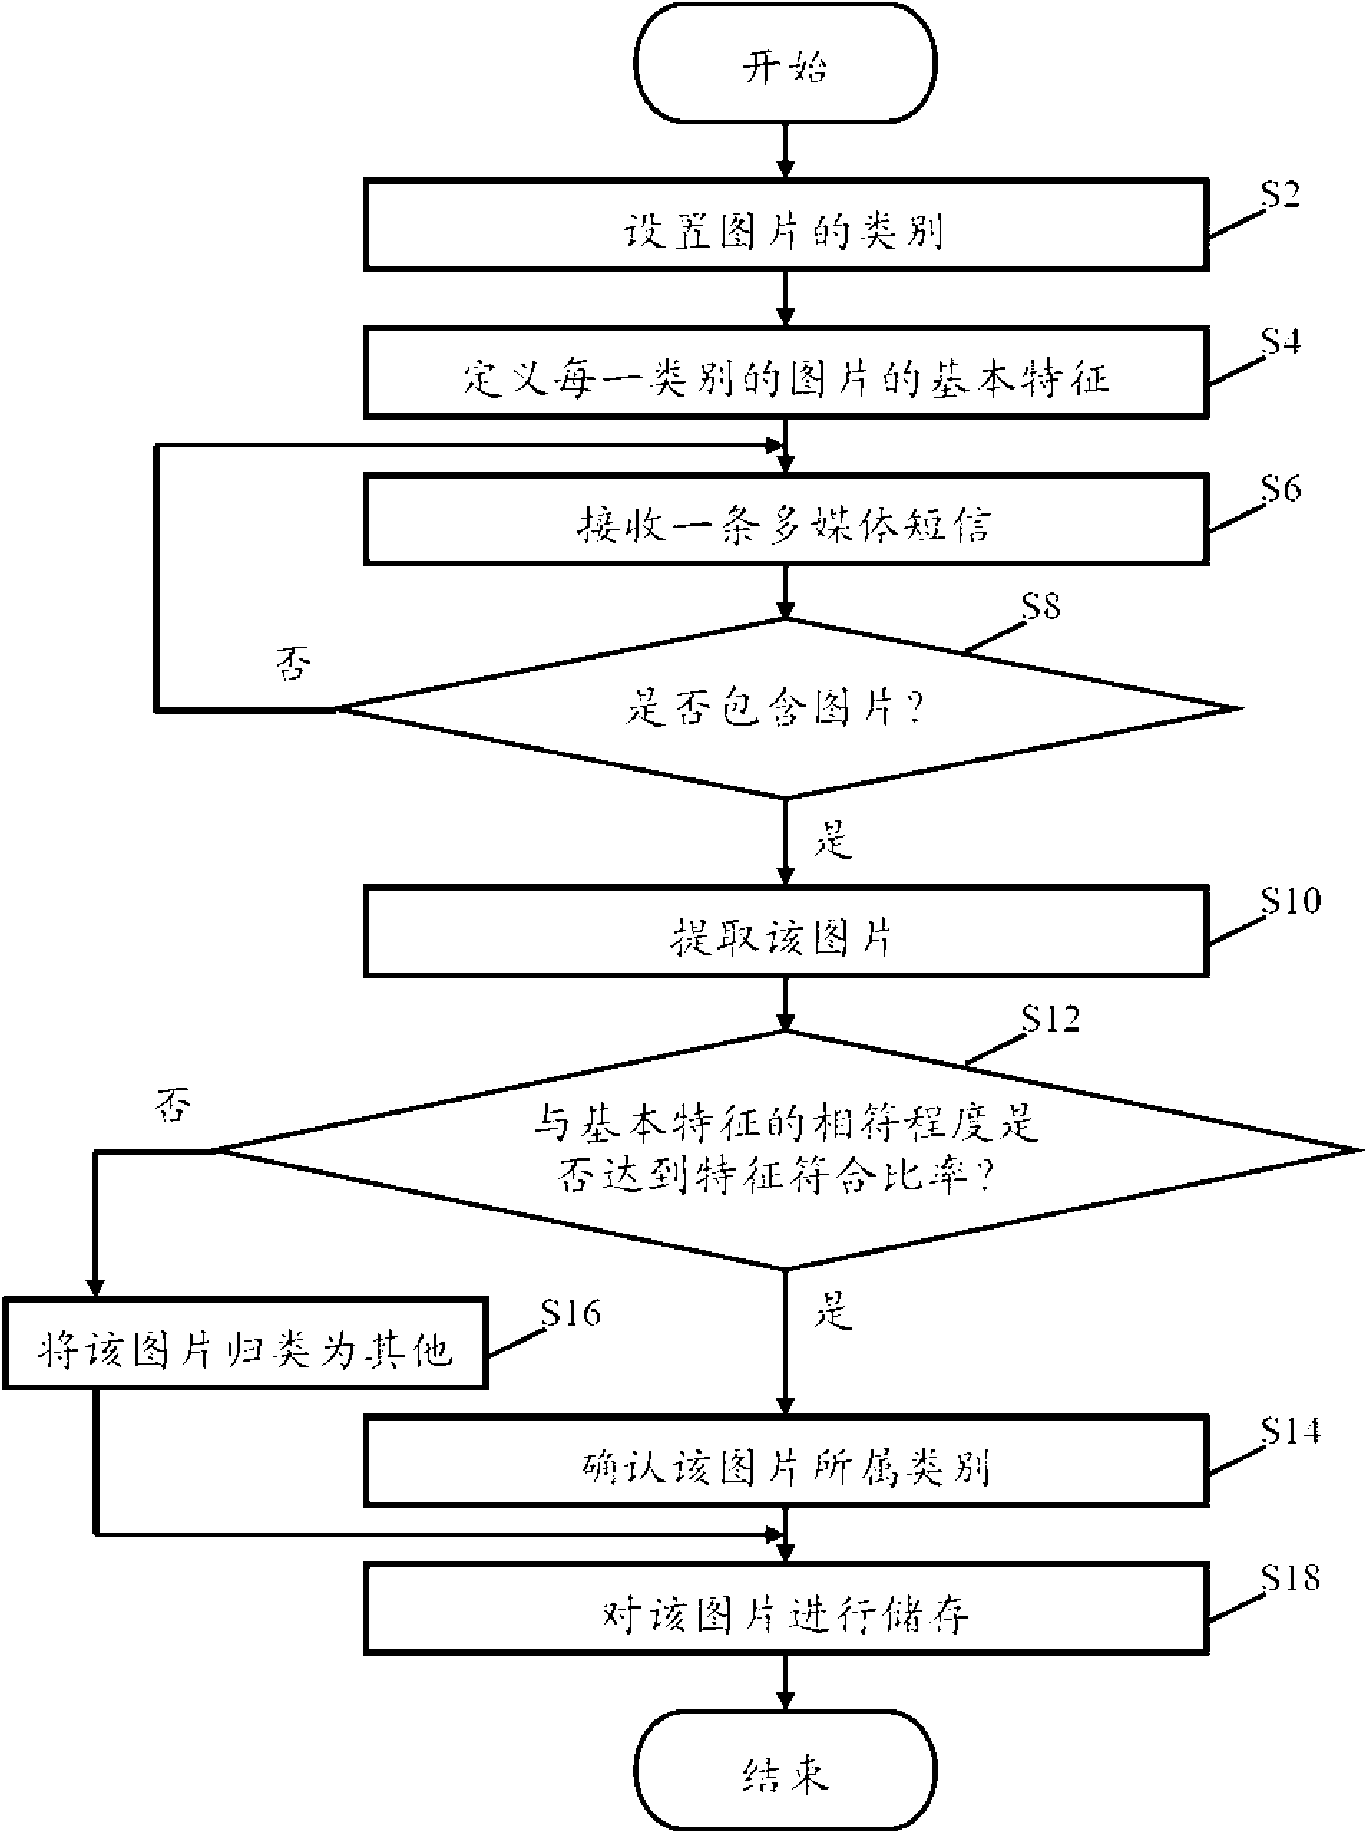 Picture classification system and method